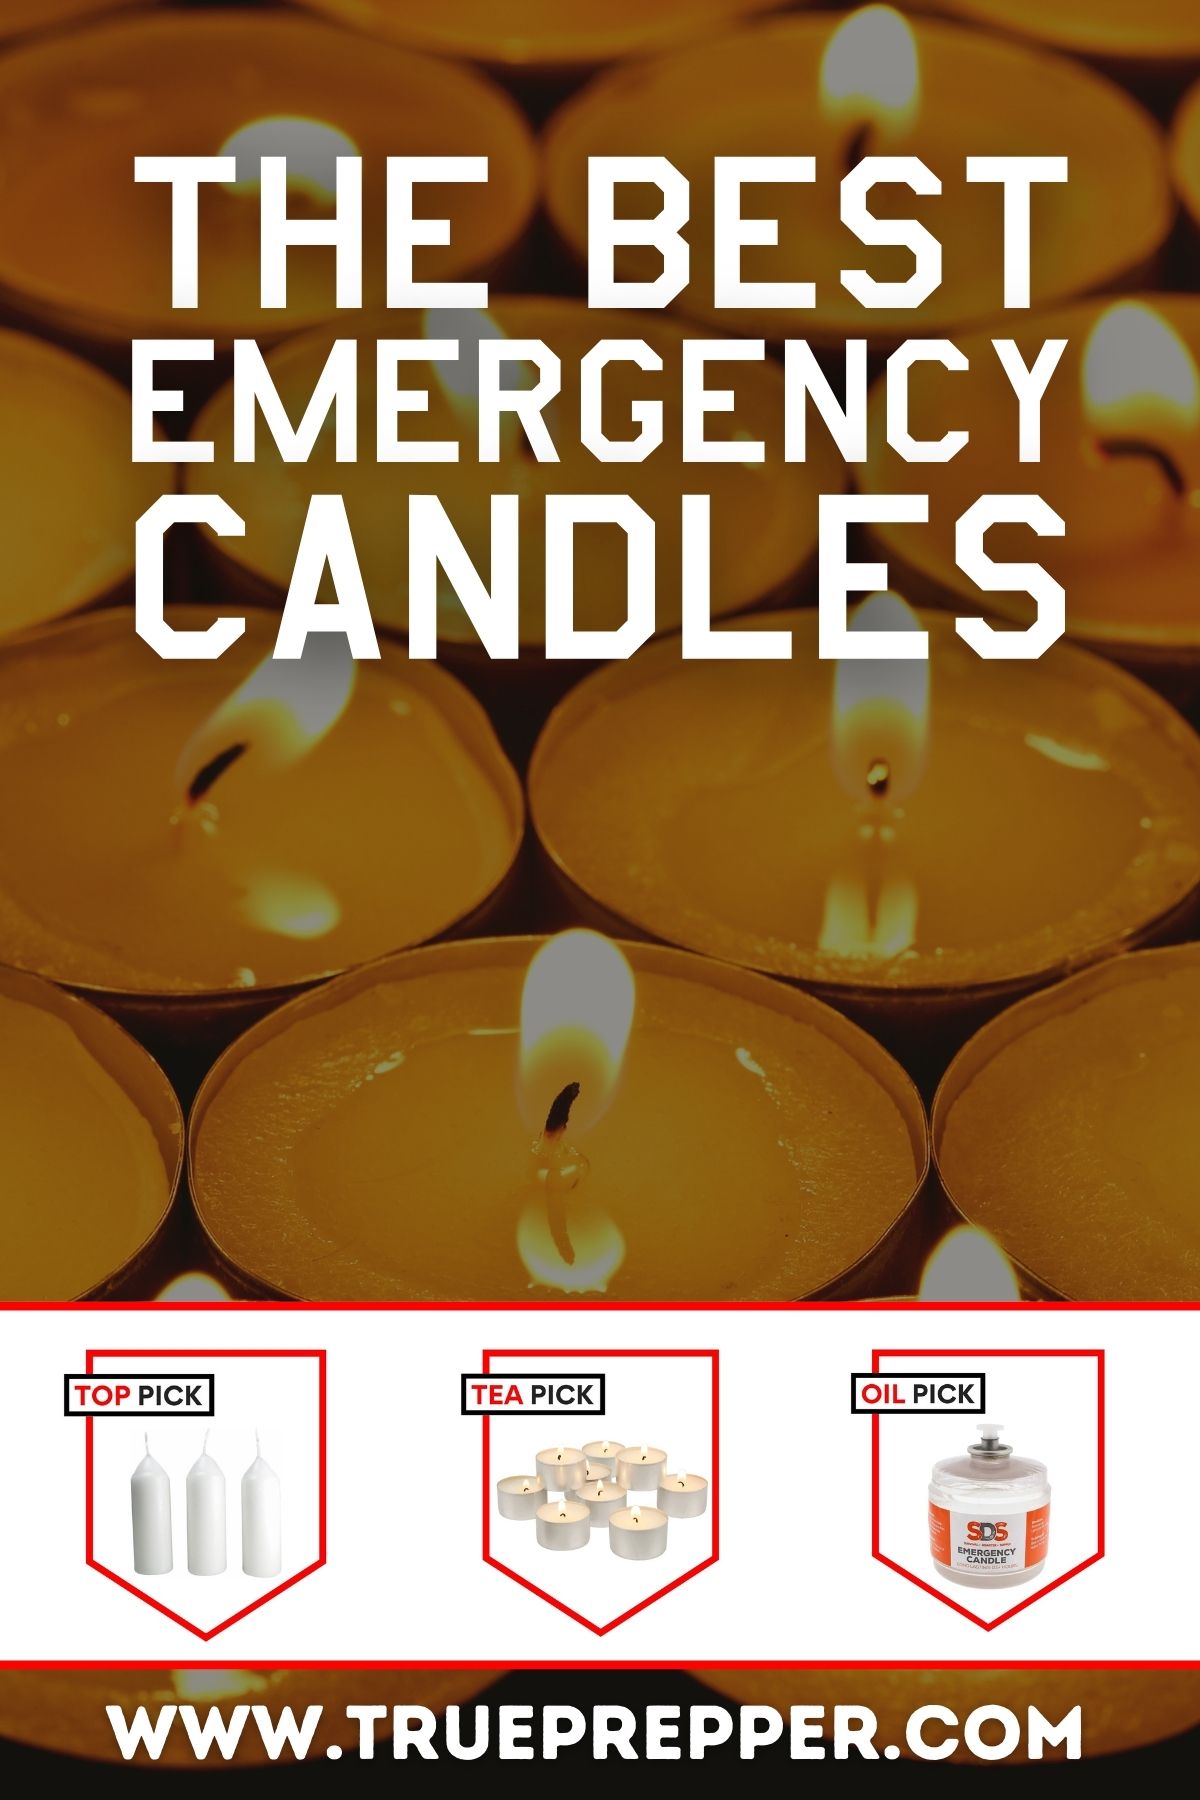 3-Pack 9 Hour Emergency Outdoor light Candle